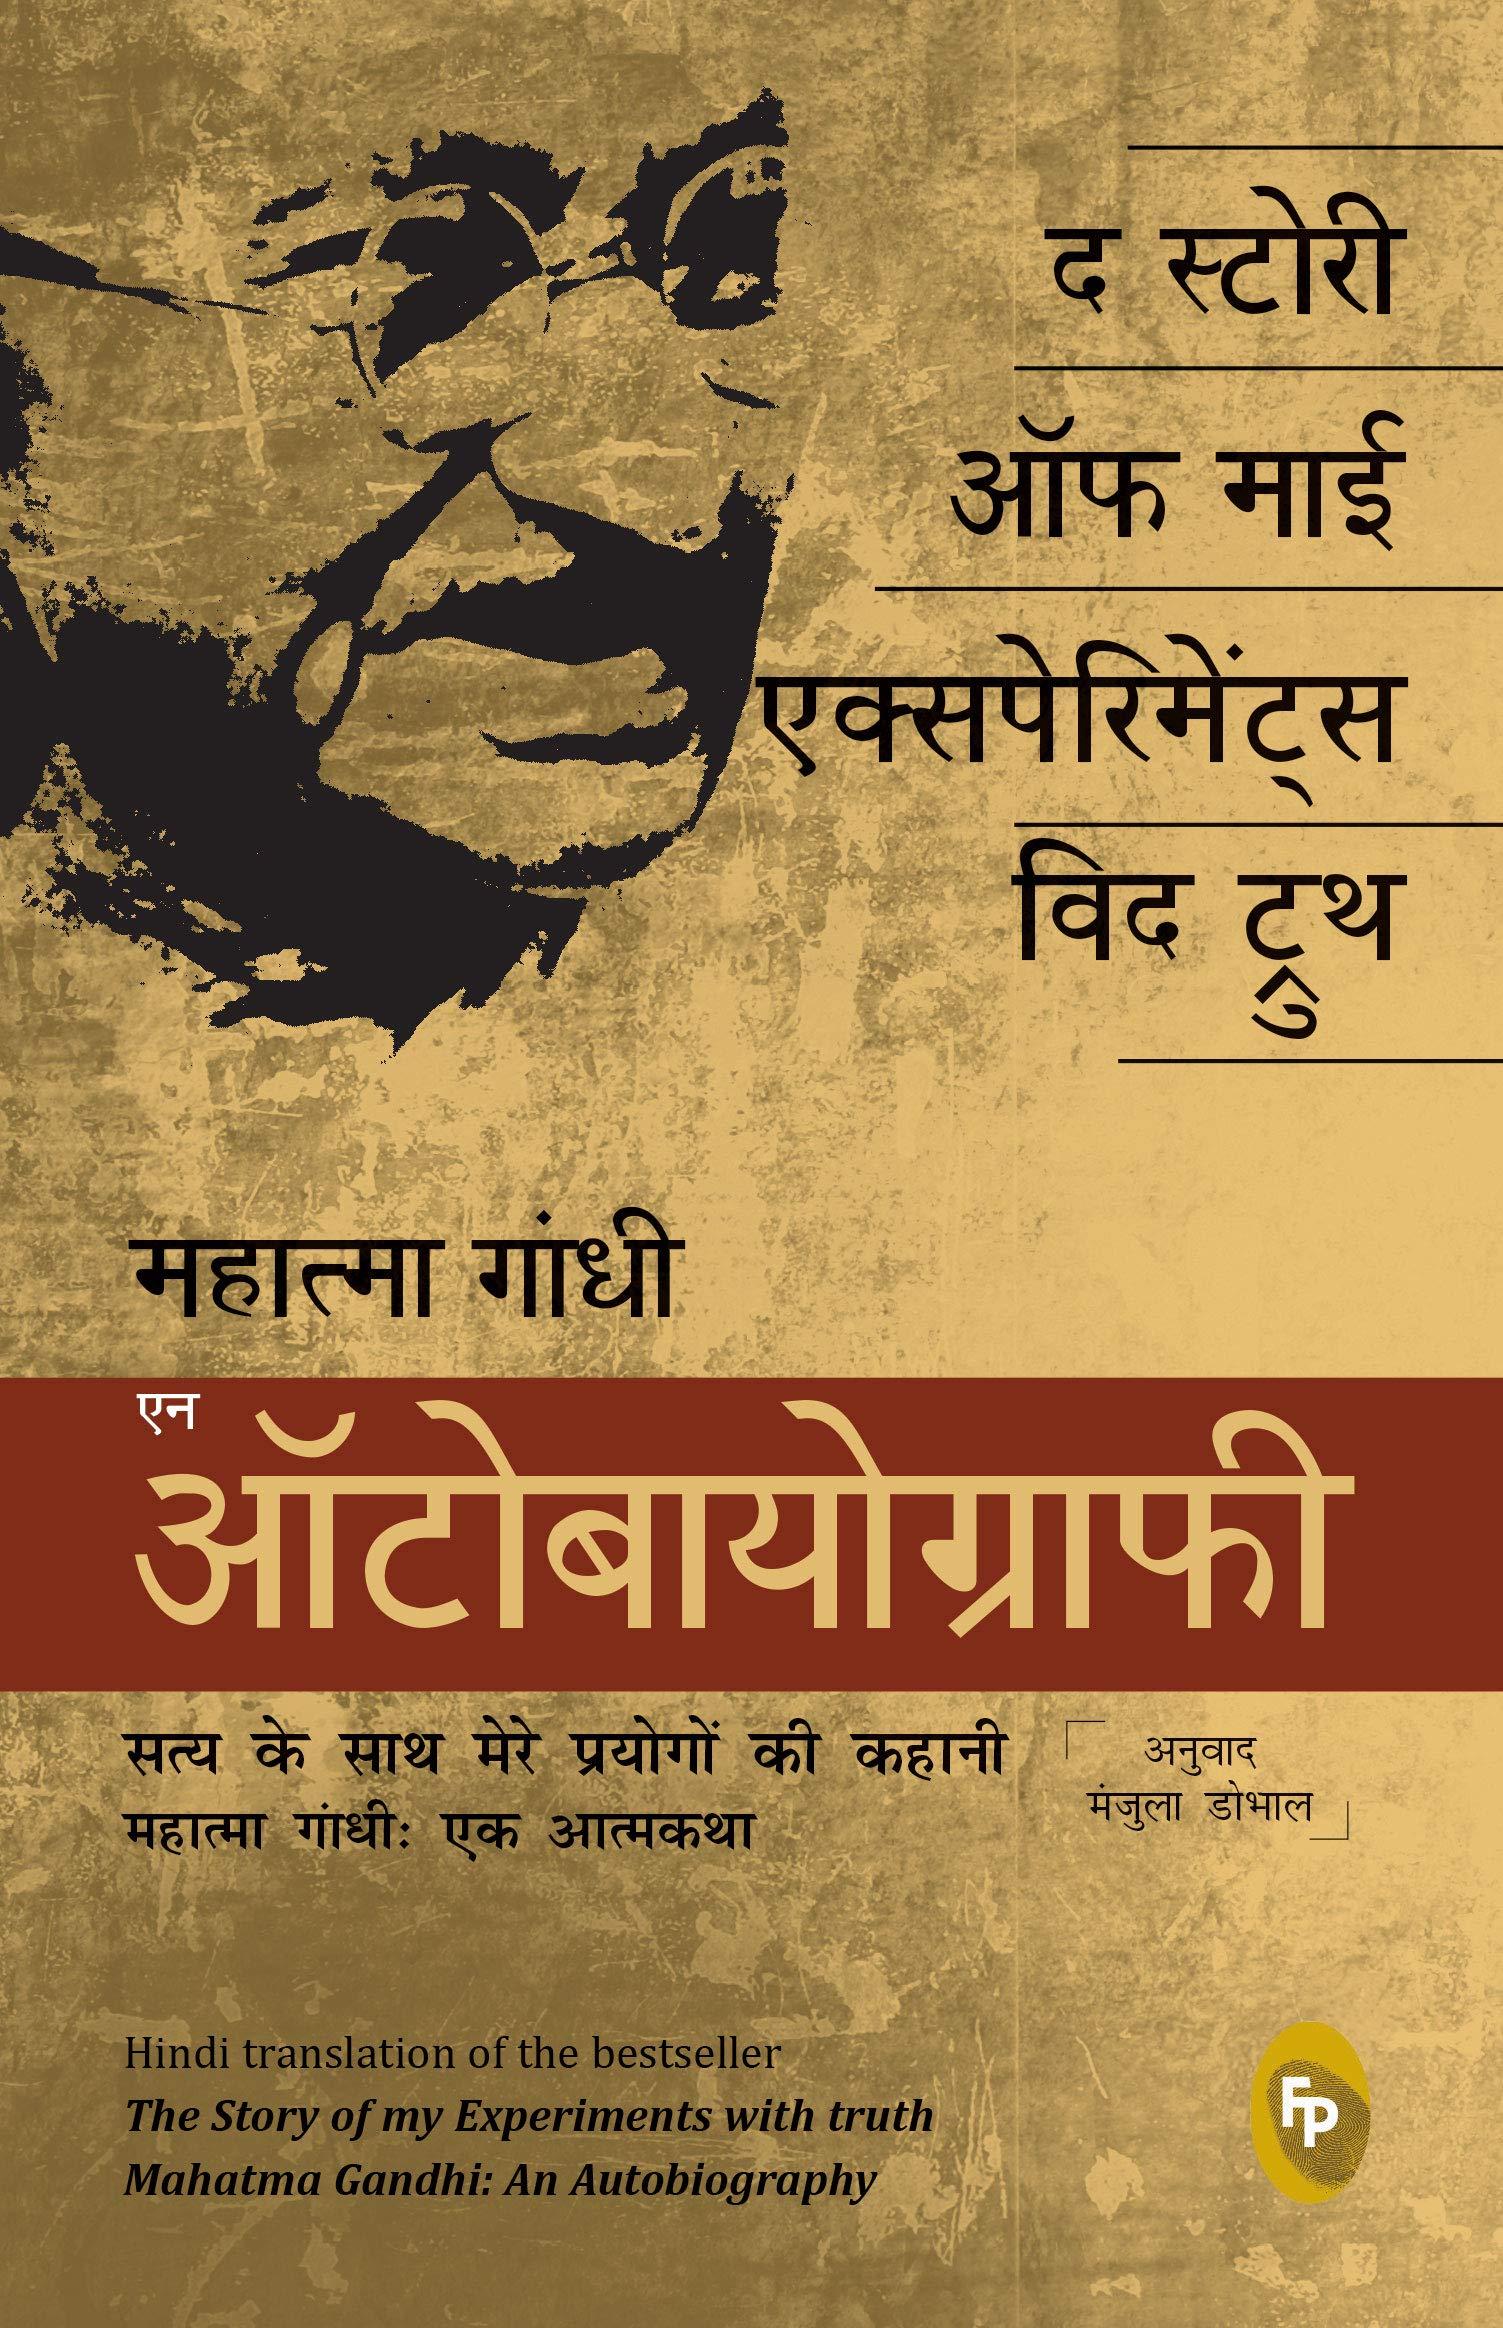 The Story Of My Experiments With Truth: Mahatma Gandhi: An Autobiography (Hindi Edition)